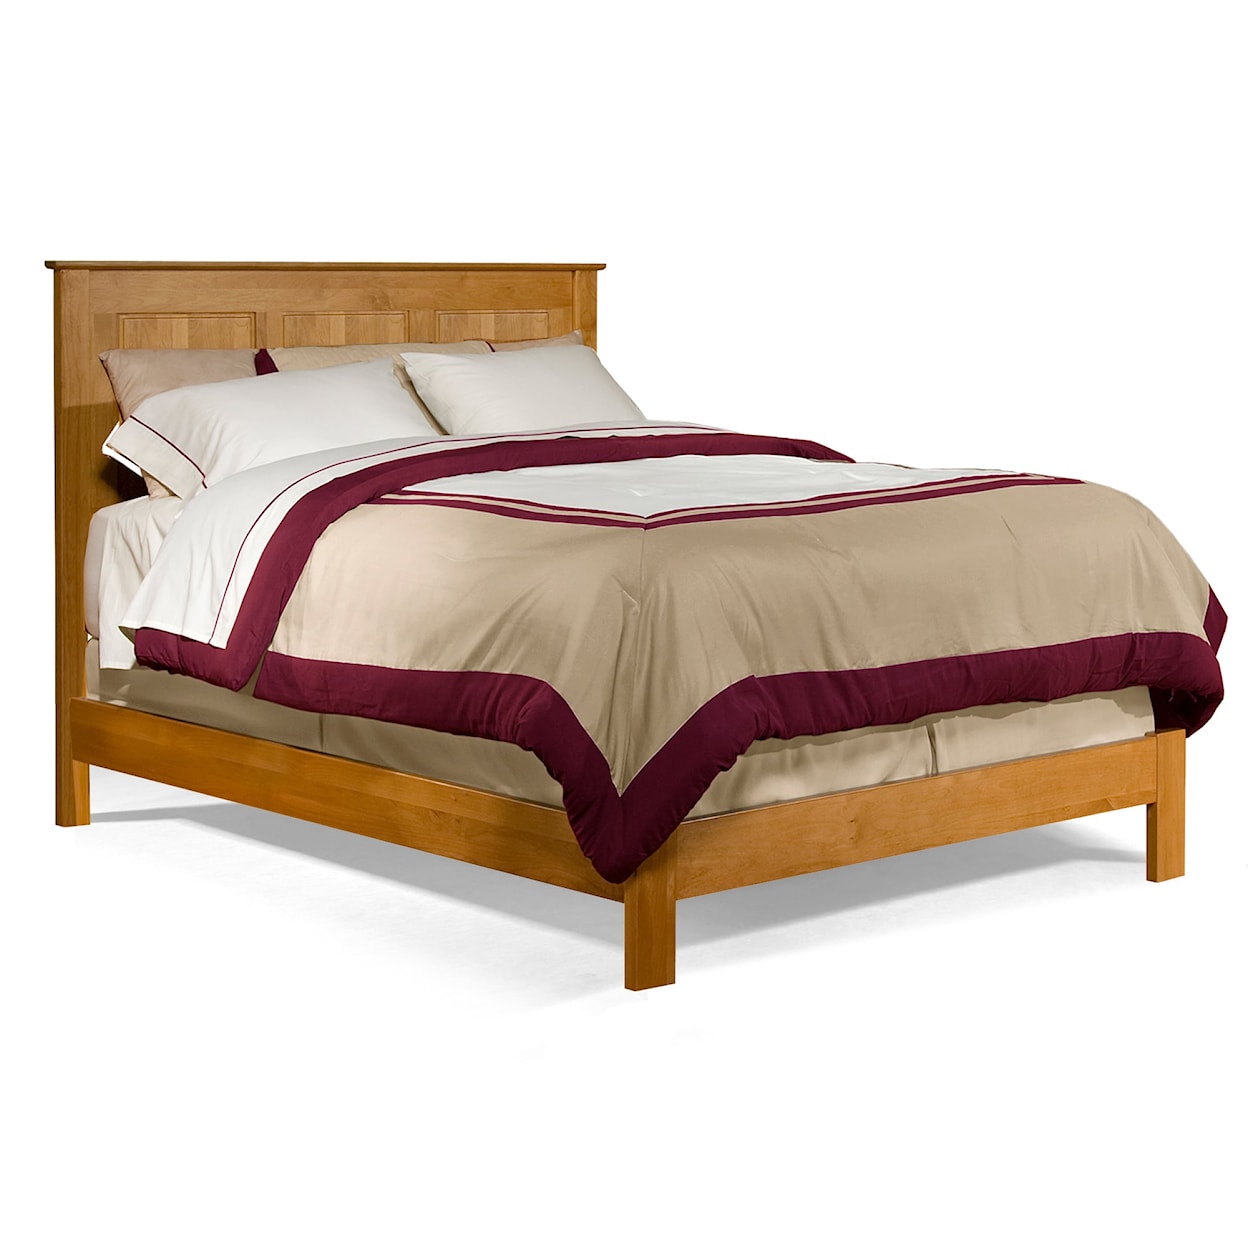 Archbold Furniture Beds Twin Essential Panel Bed